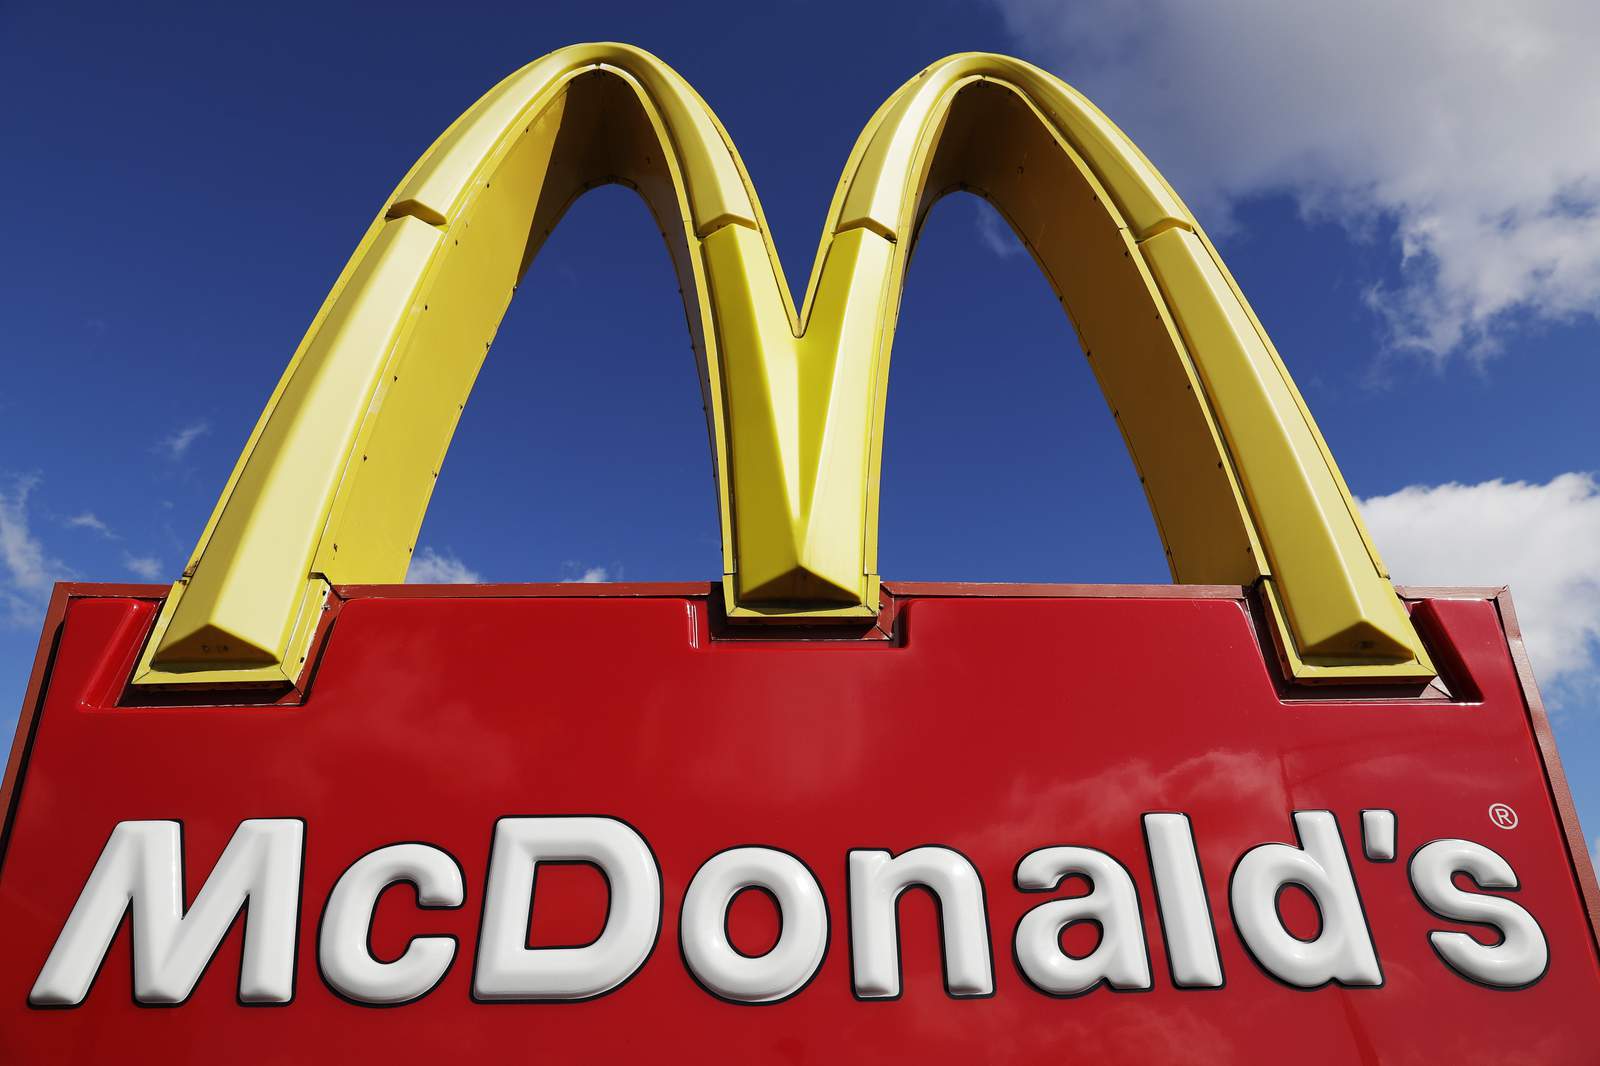 McDonald's US sales strong in Q4, but COVID drags elsewhere